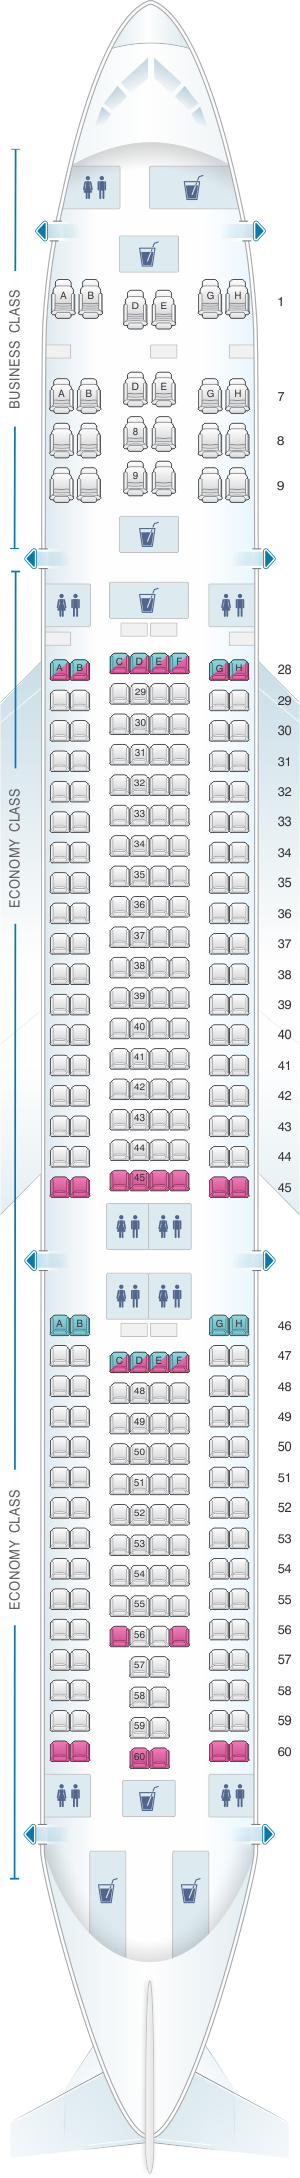 Seat map for Csa Czech Airlines Airbus A330 300